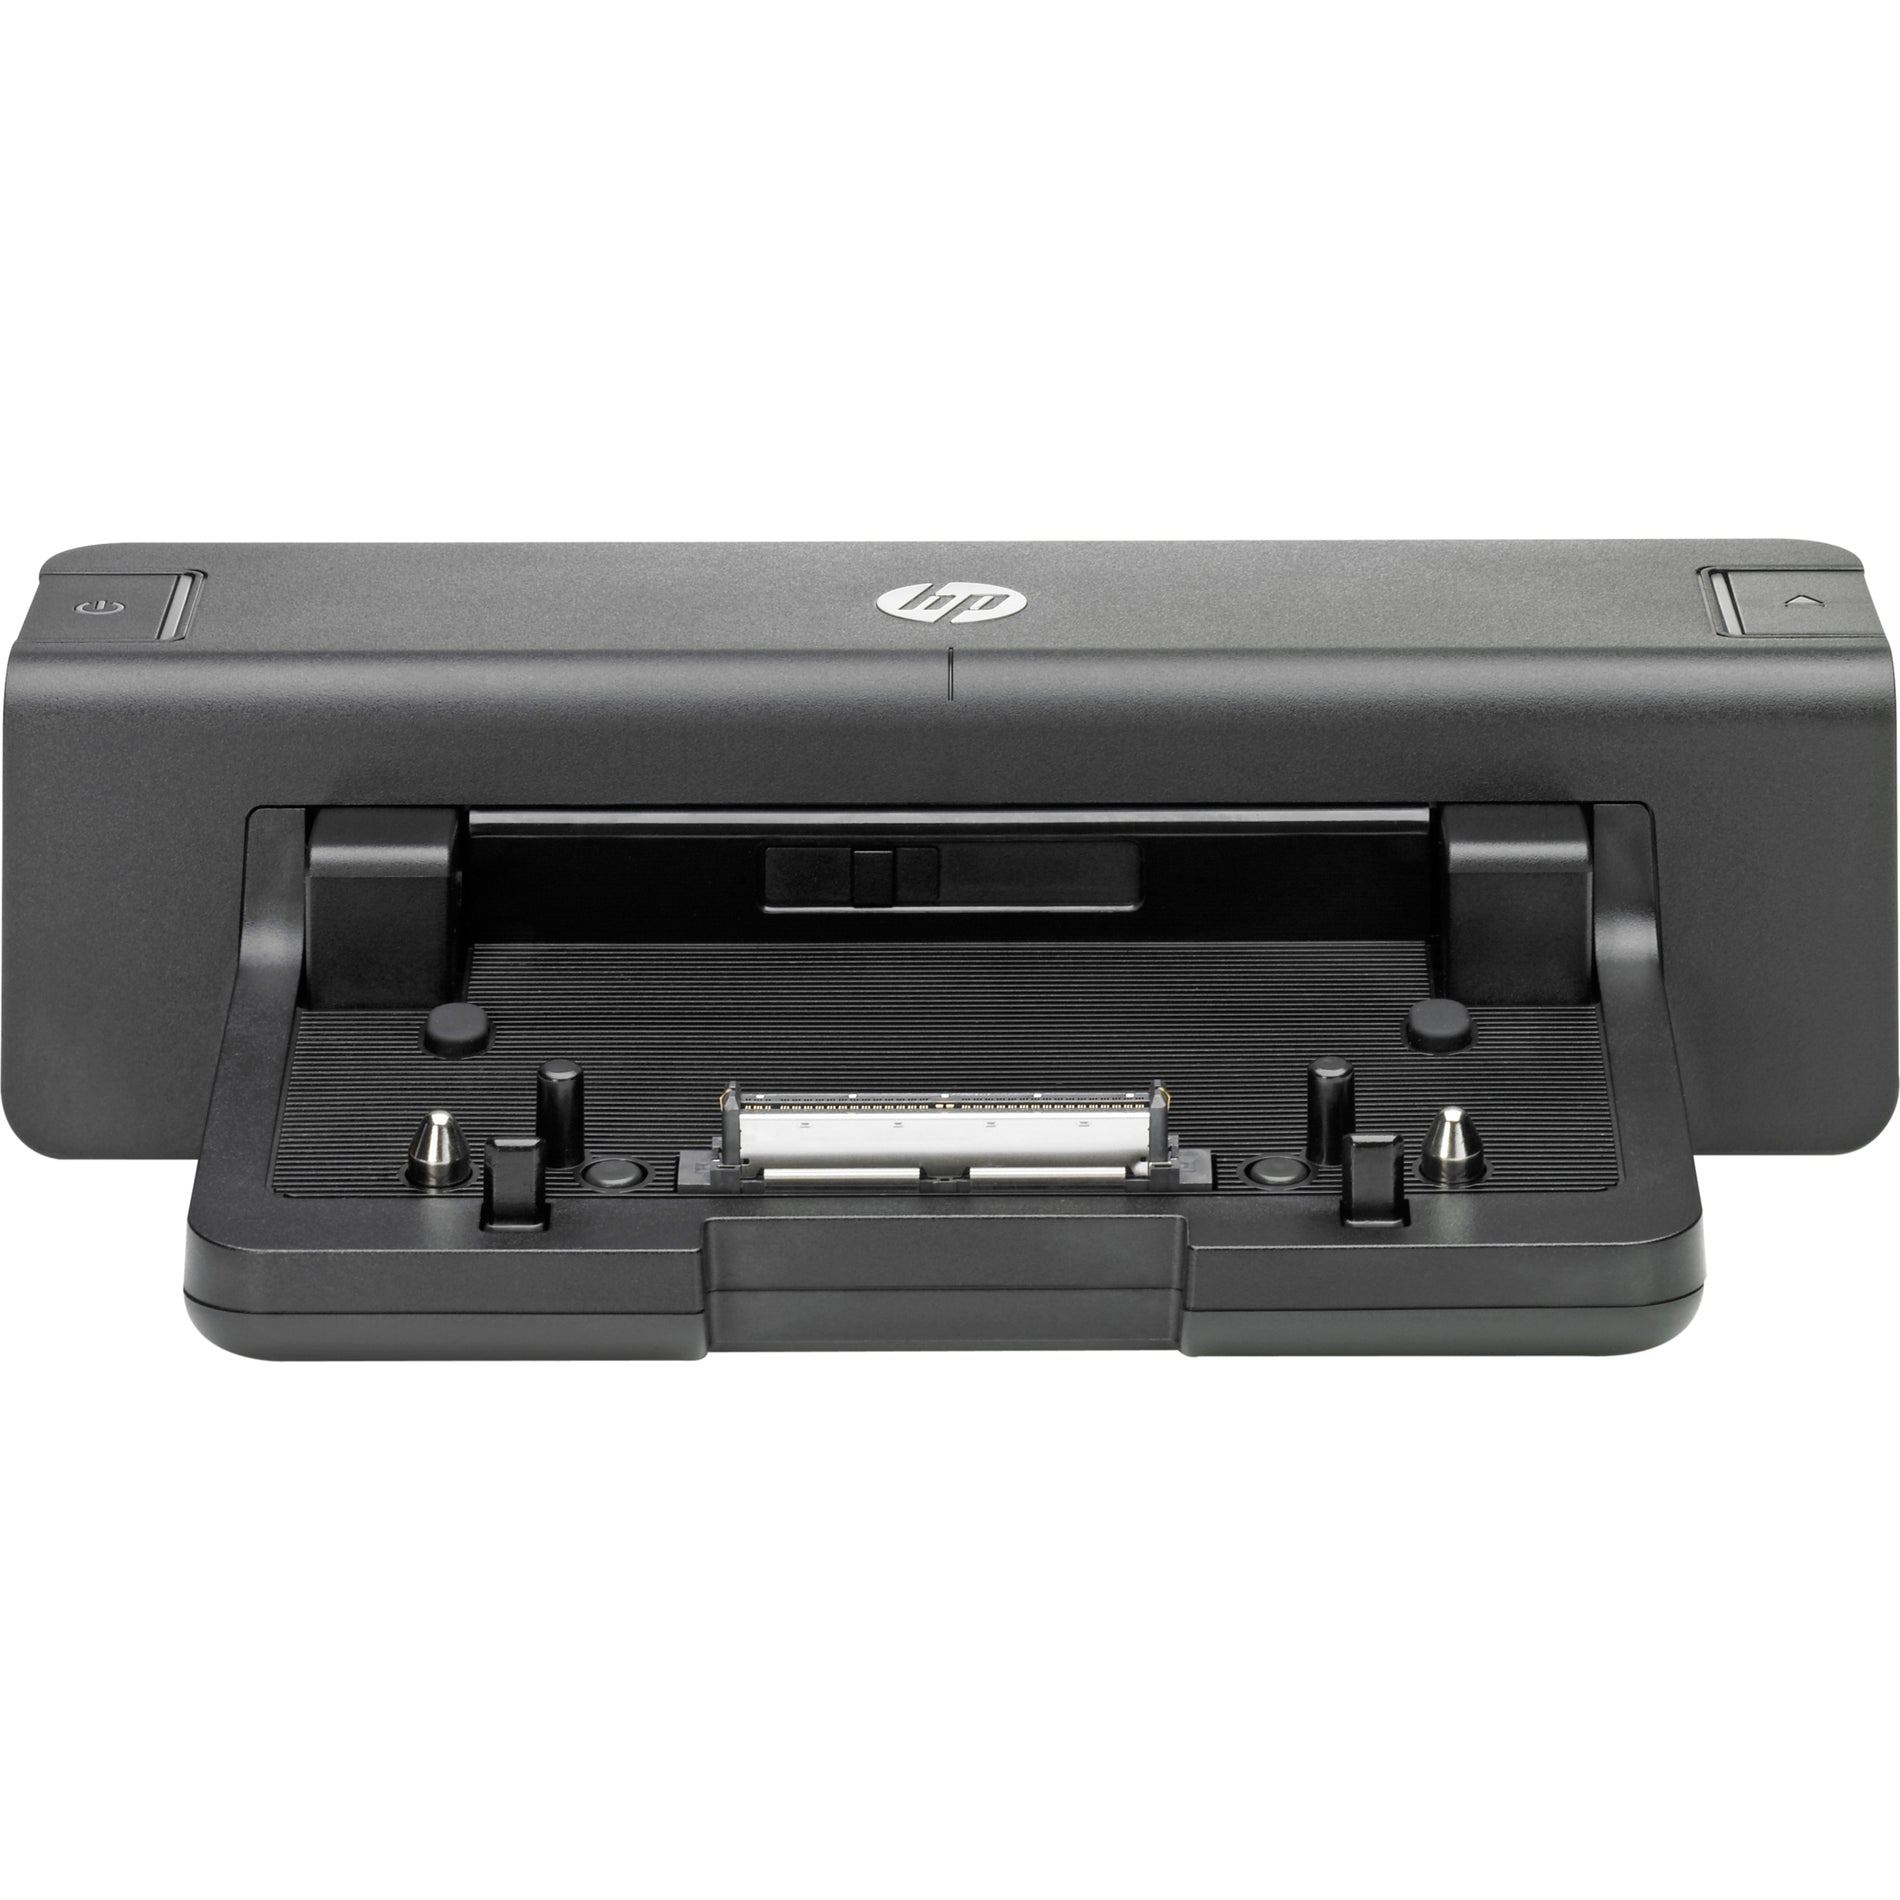 HP A7E32AA Remarketed 2012 90W Docking Station, Compatible with HP ProBook and EliteBook Notebooks